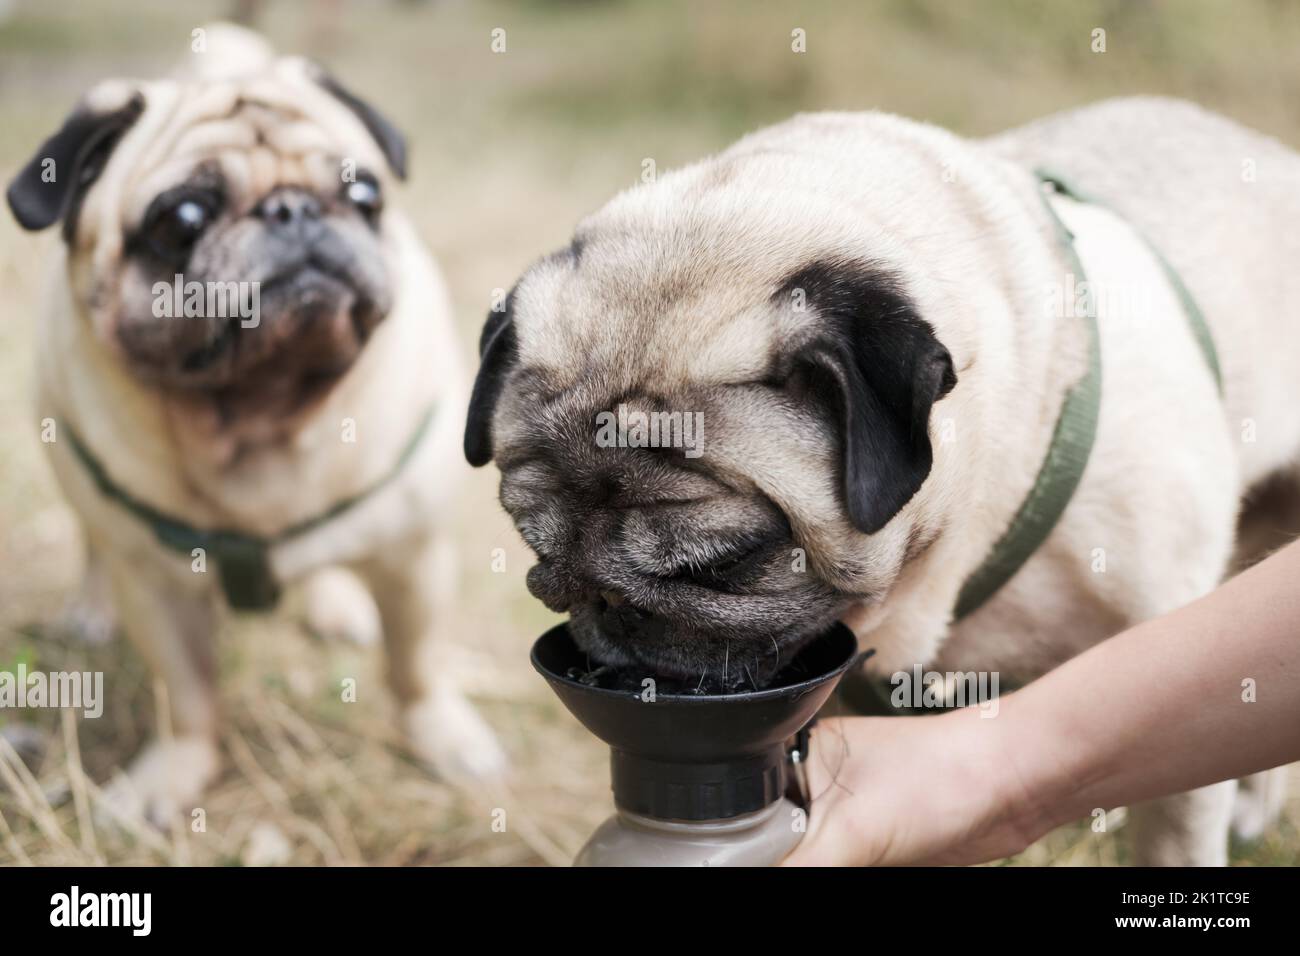 Funny pug drinking from a dog water bottle. Lifestyle with dogs, taking care of pets outdoors, staying hydrated outside on the walk Stock Photo